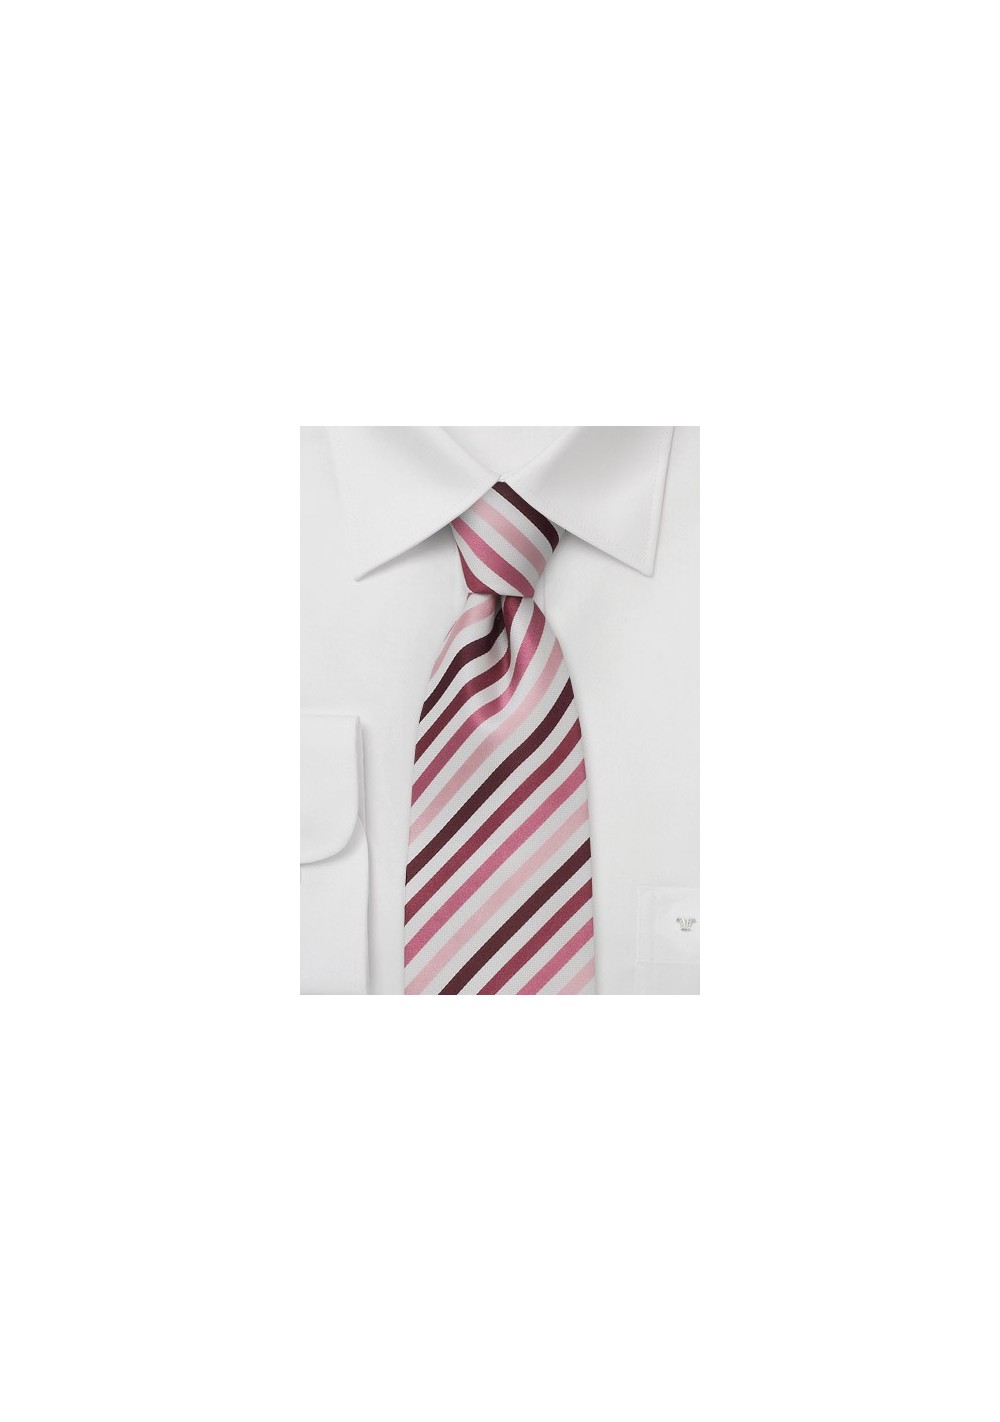 Narrow striped tie - Tie in light pink, rose, and purple.